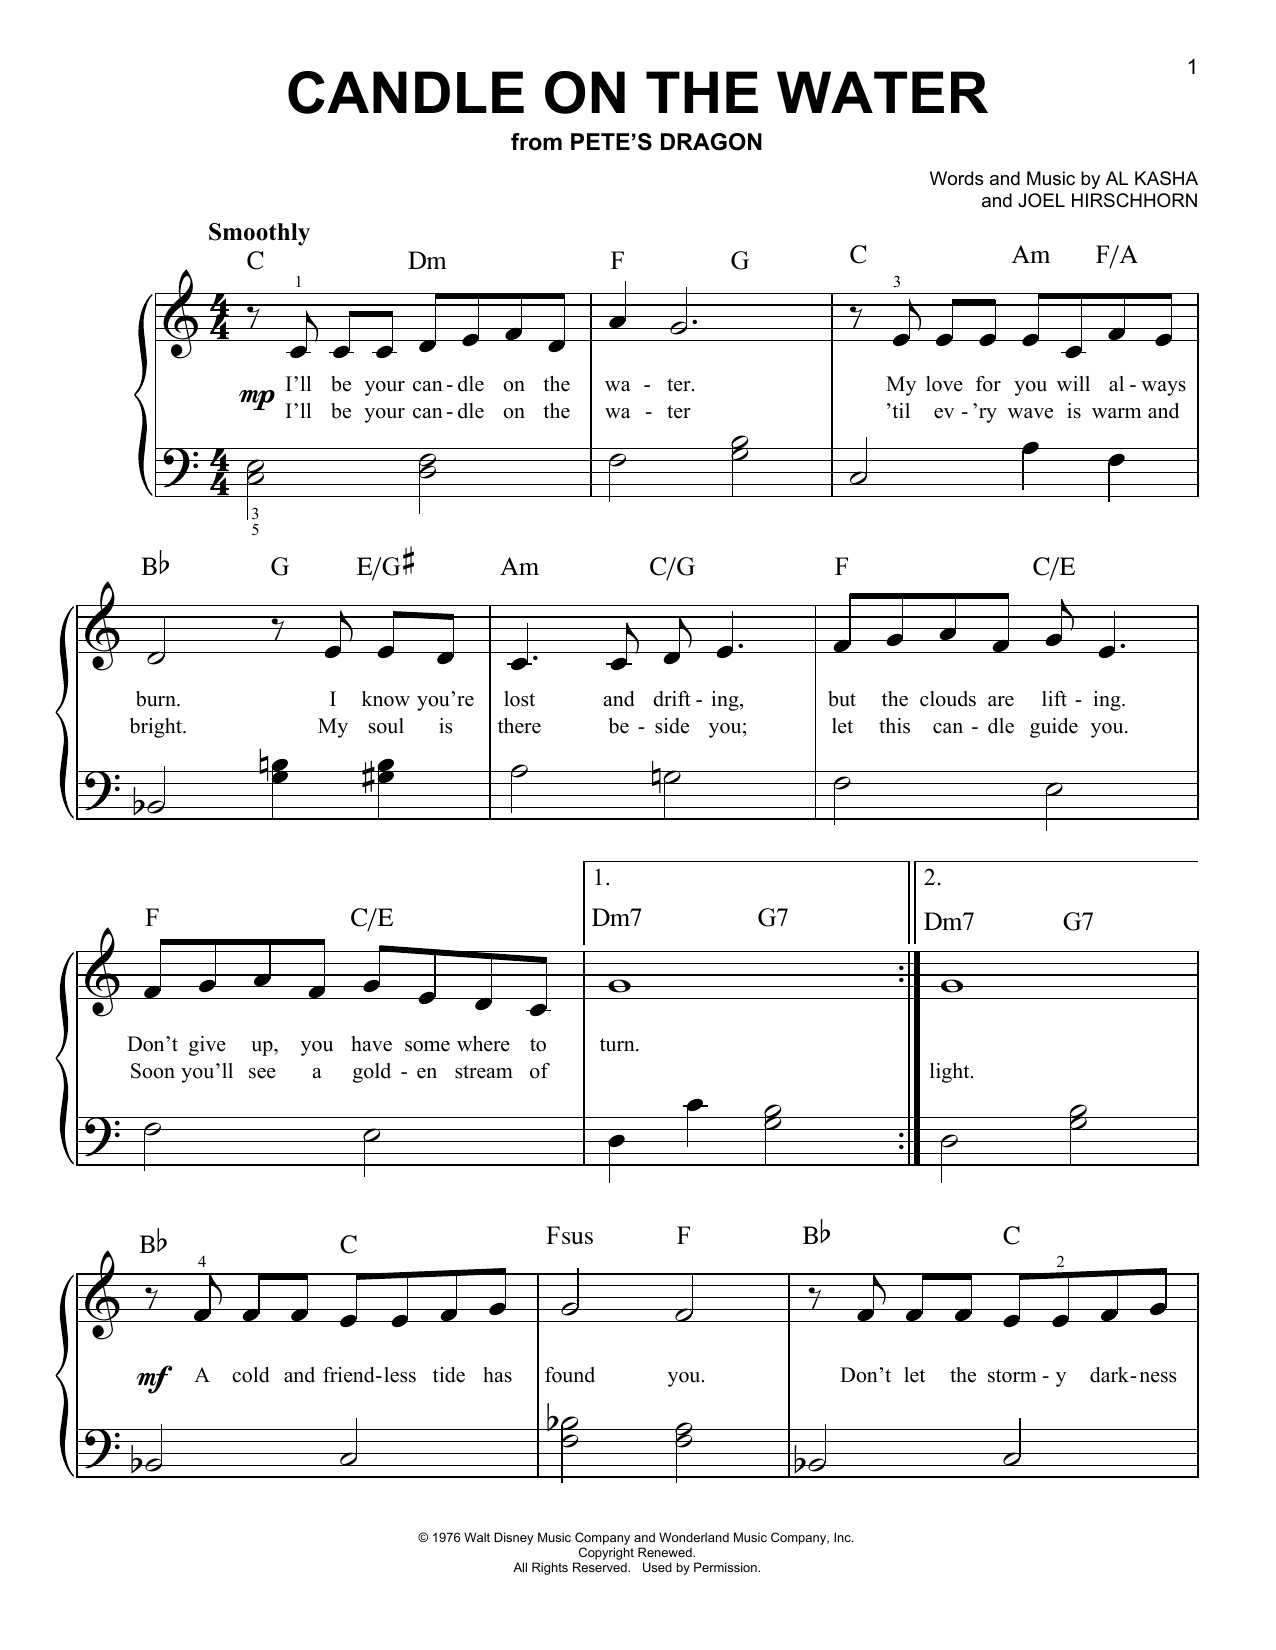 Download Al Kasha & Joel Hirschhorn Candle On The Water (from Pete's Dragon Sheet Music